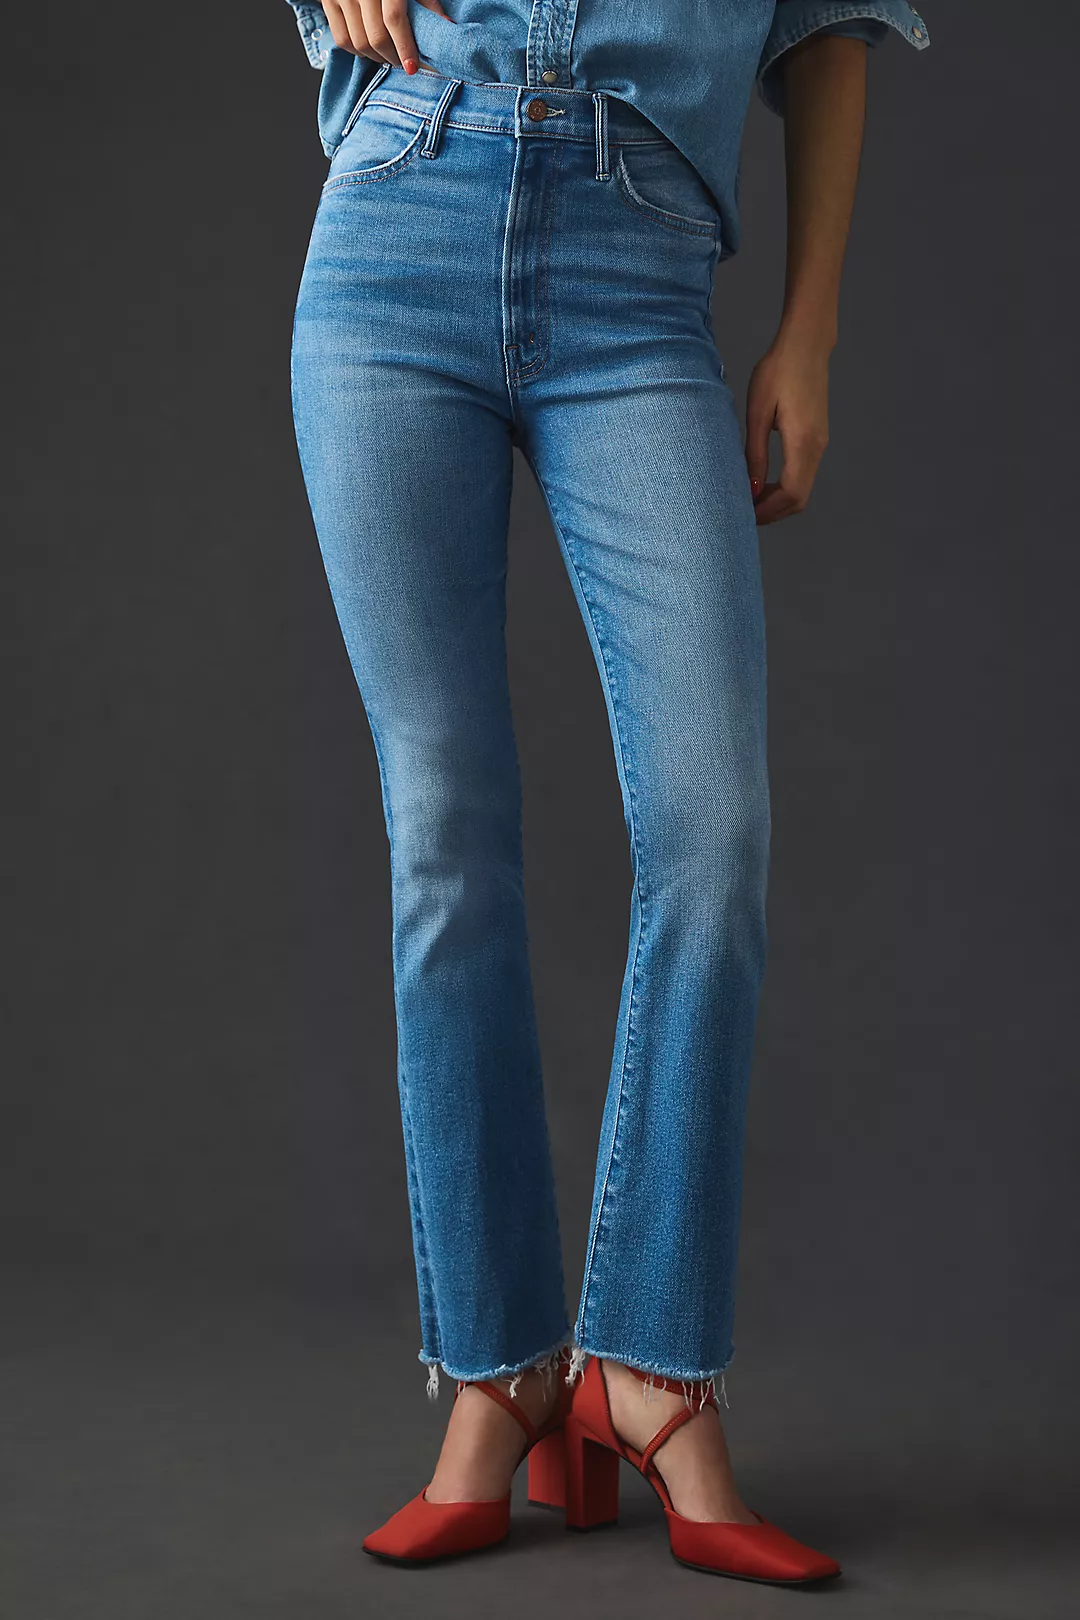 Women's Slim Jeans - High-Rise, Ankled & Flared